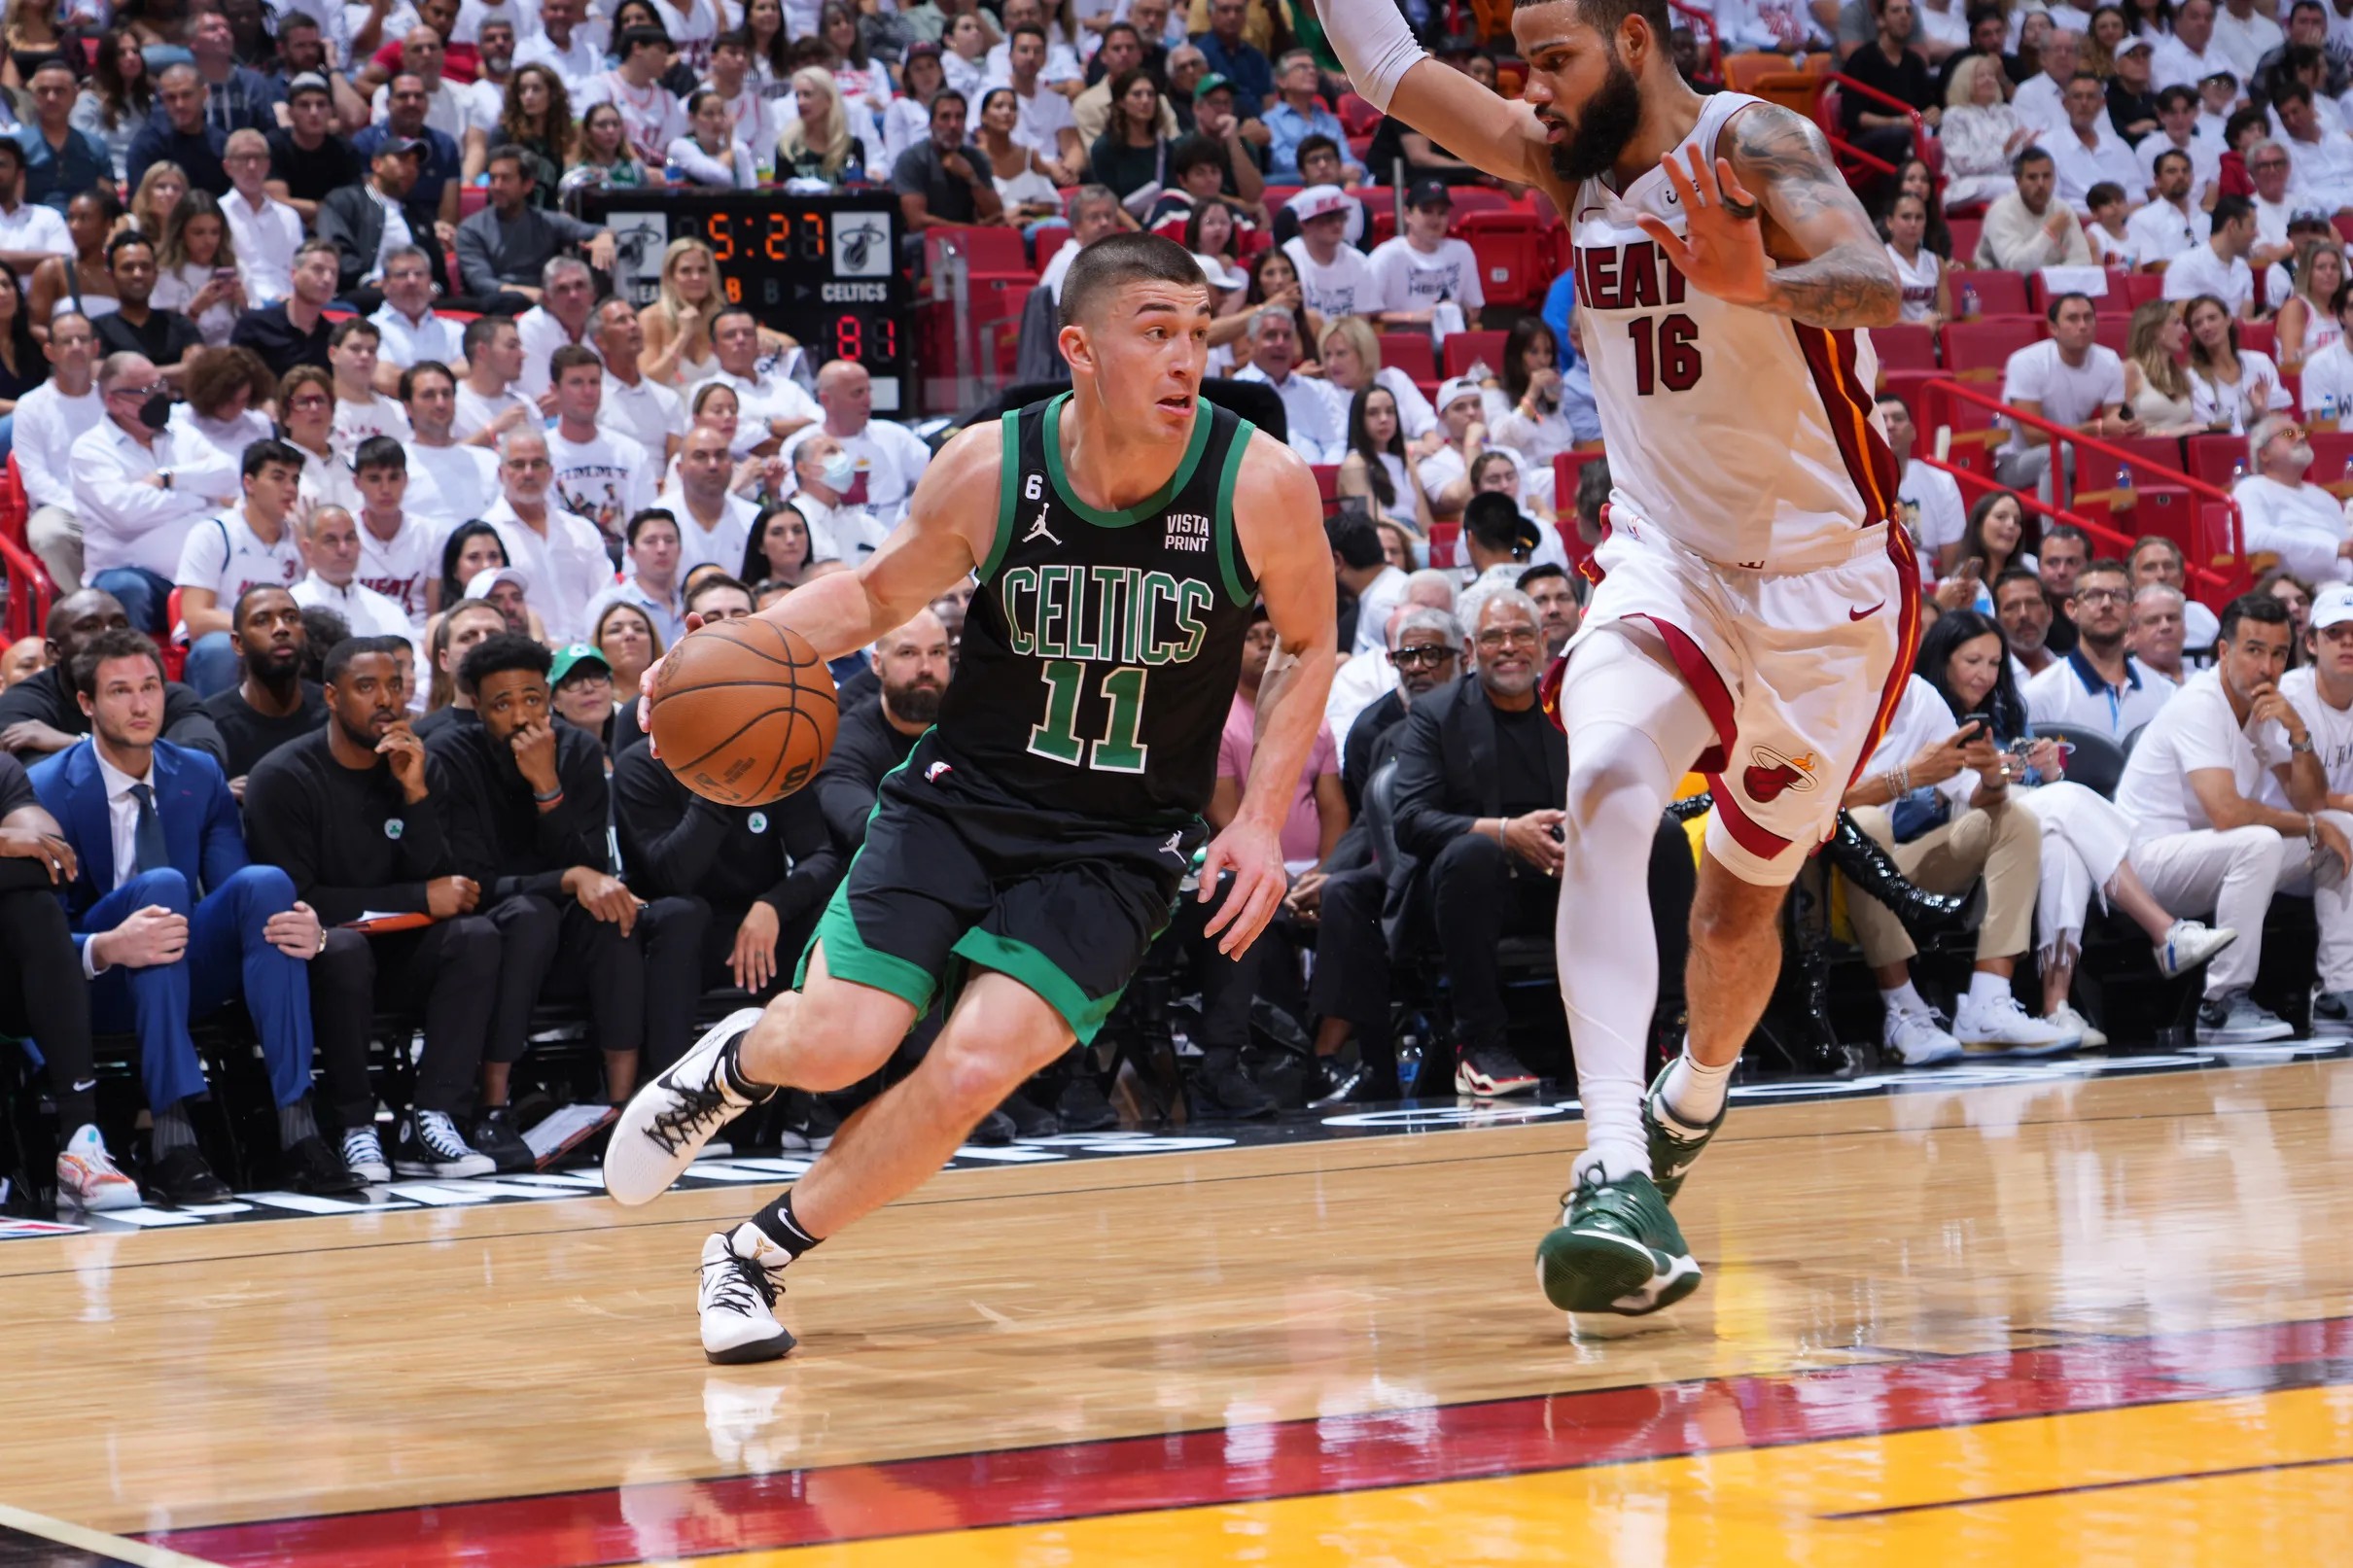 Celtics reportedly going to hang on to Payton Pritchard at trade